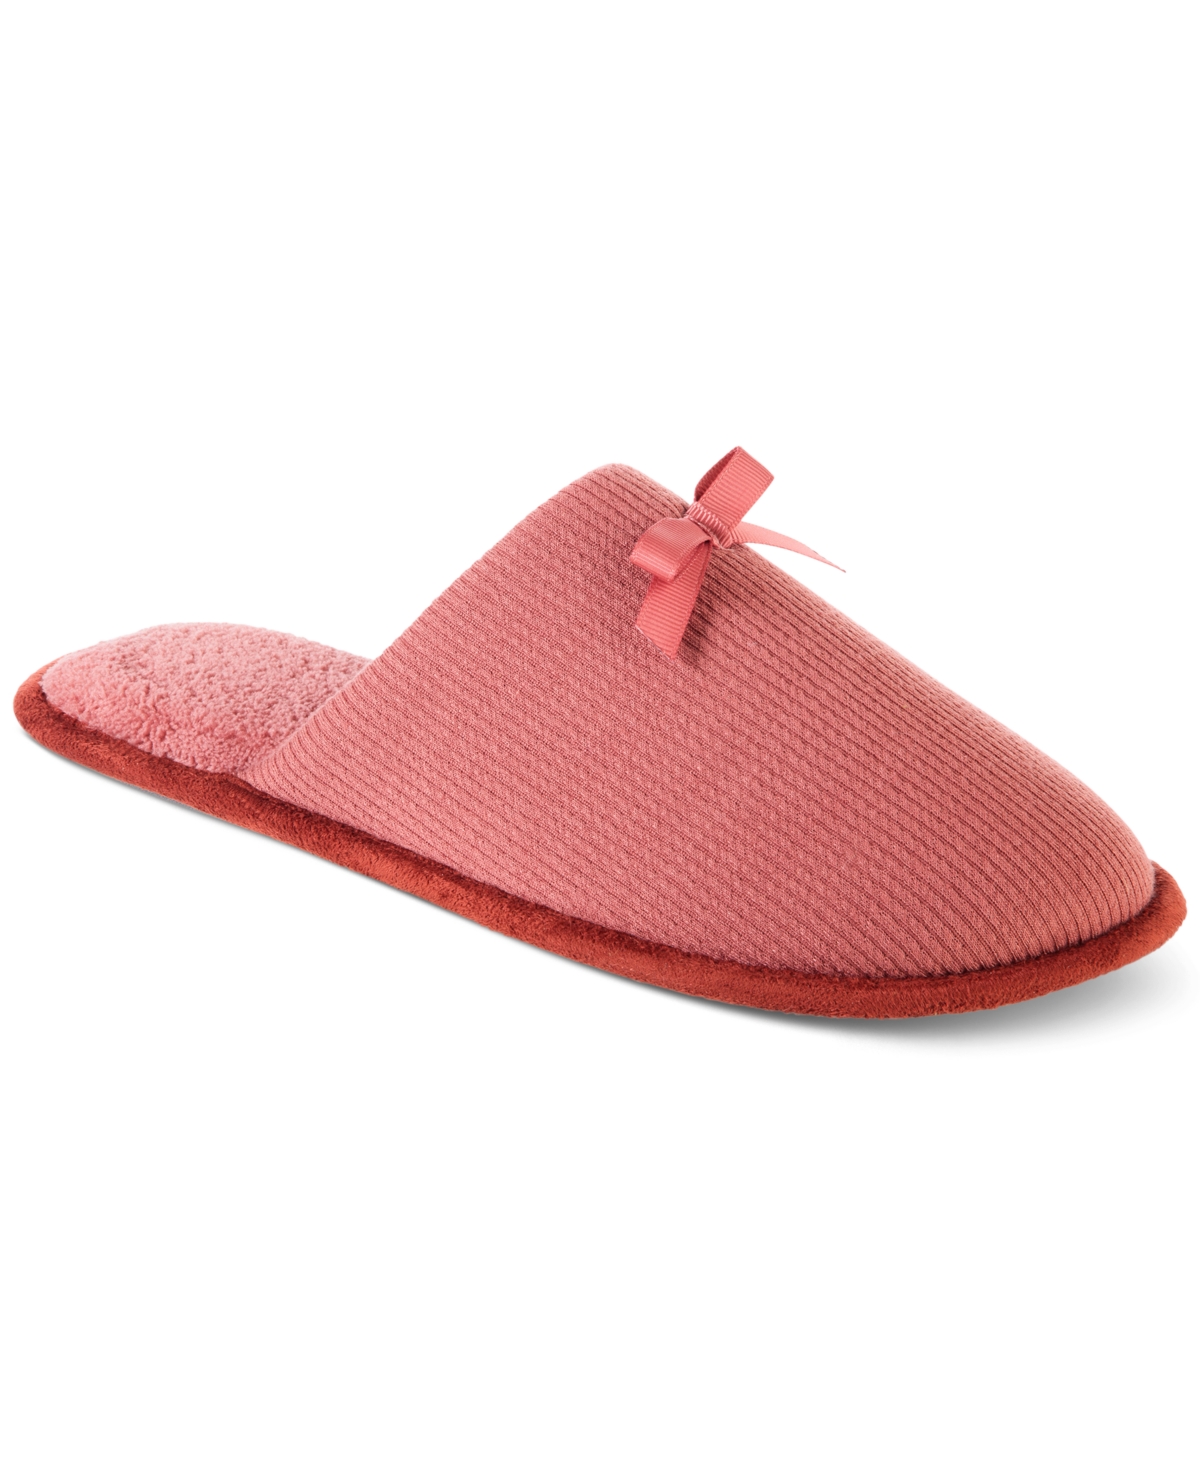 Women's Waffle-Knit Clog Slippers - Pink Clay